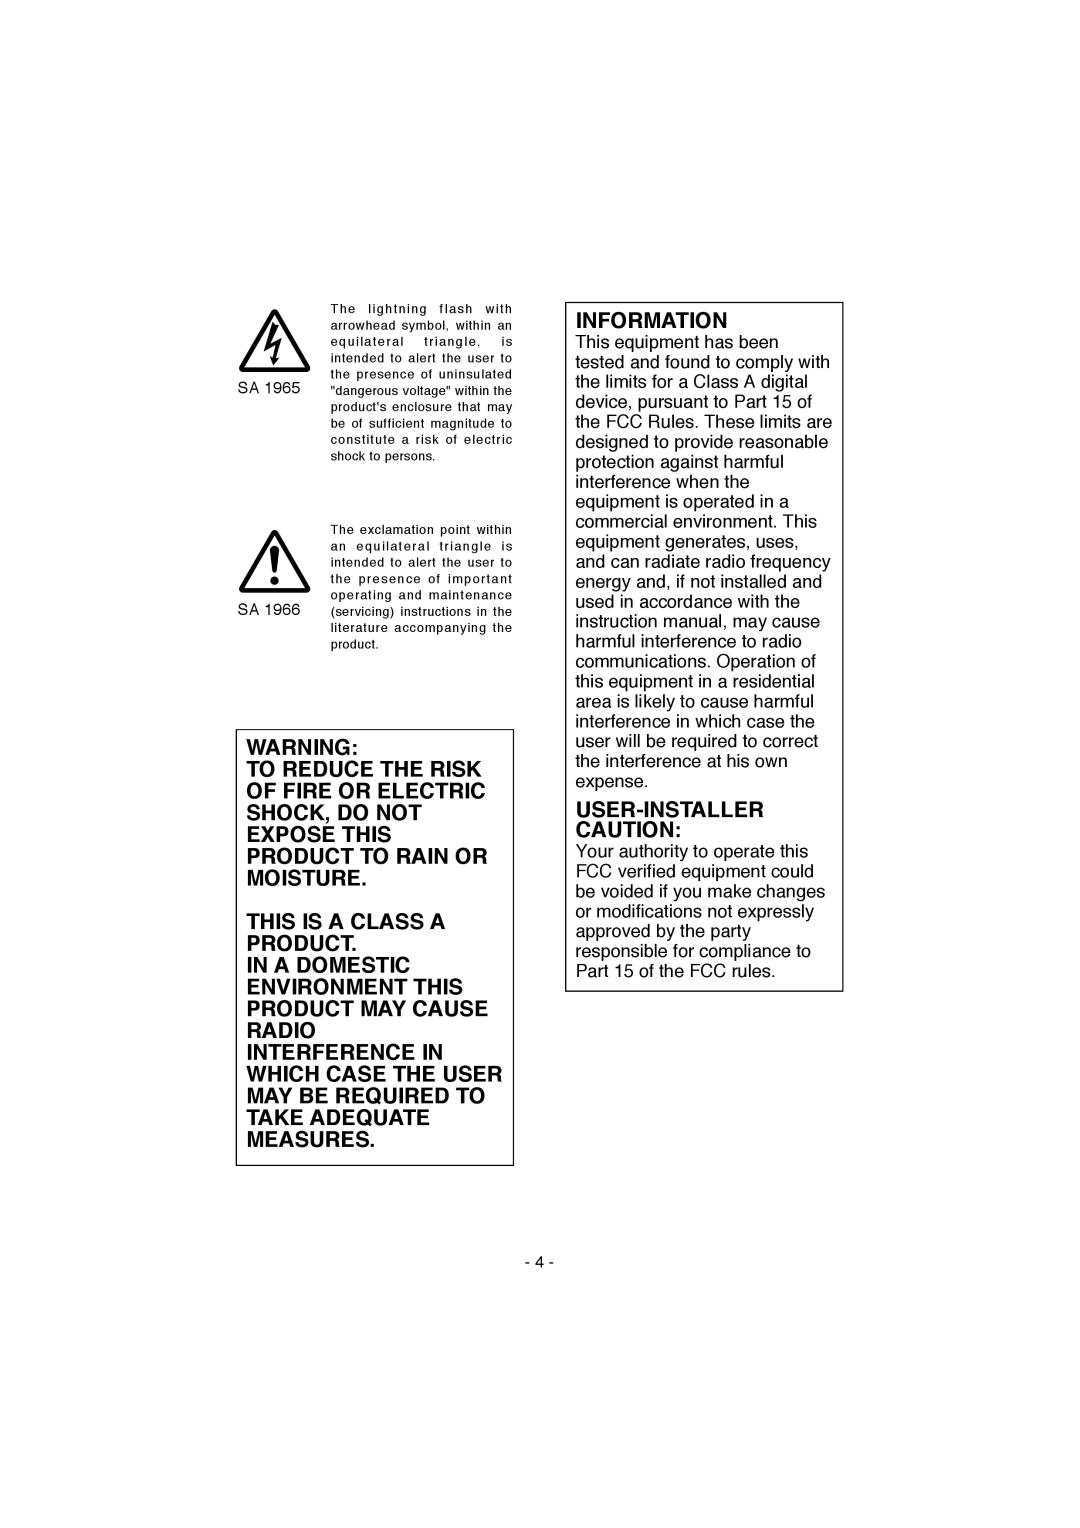 Elmo HV-100XG instruction manual This Is A Class A Product, Information, User-Installer 